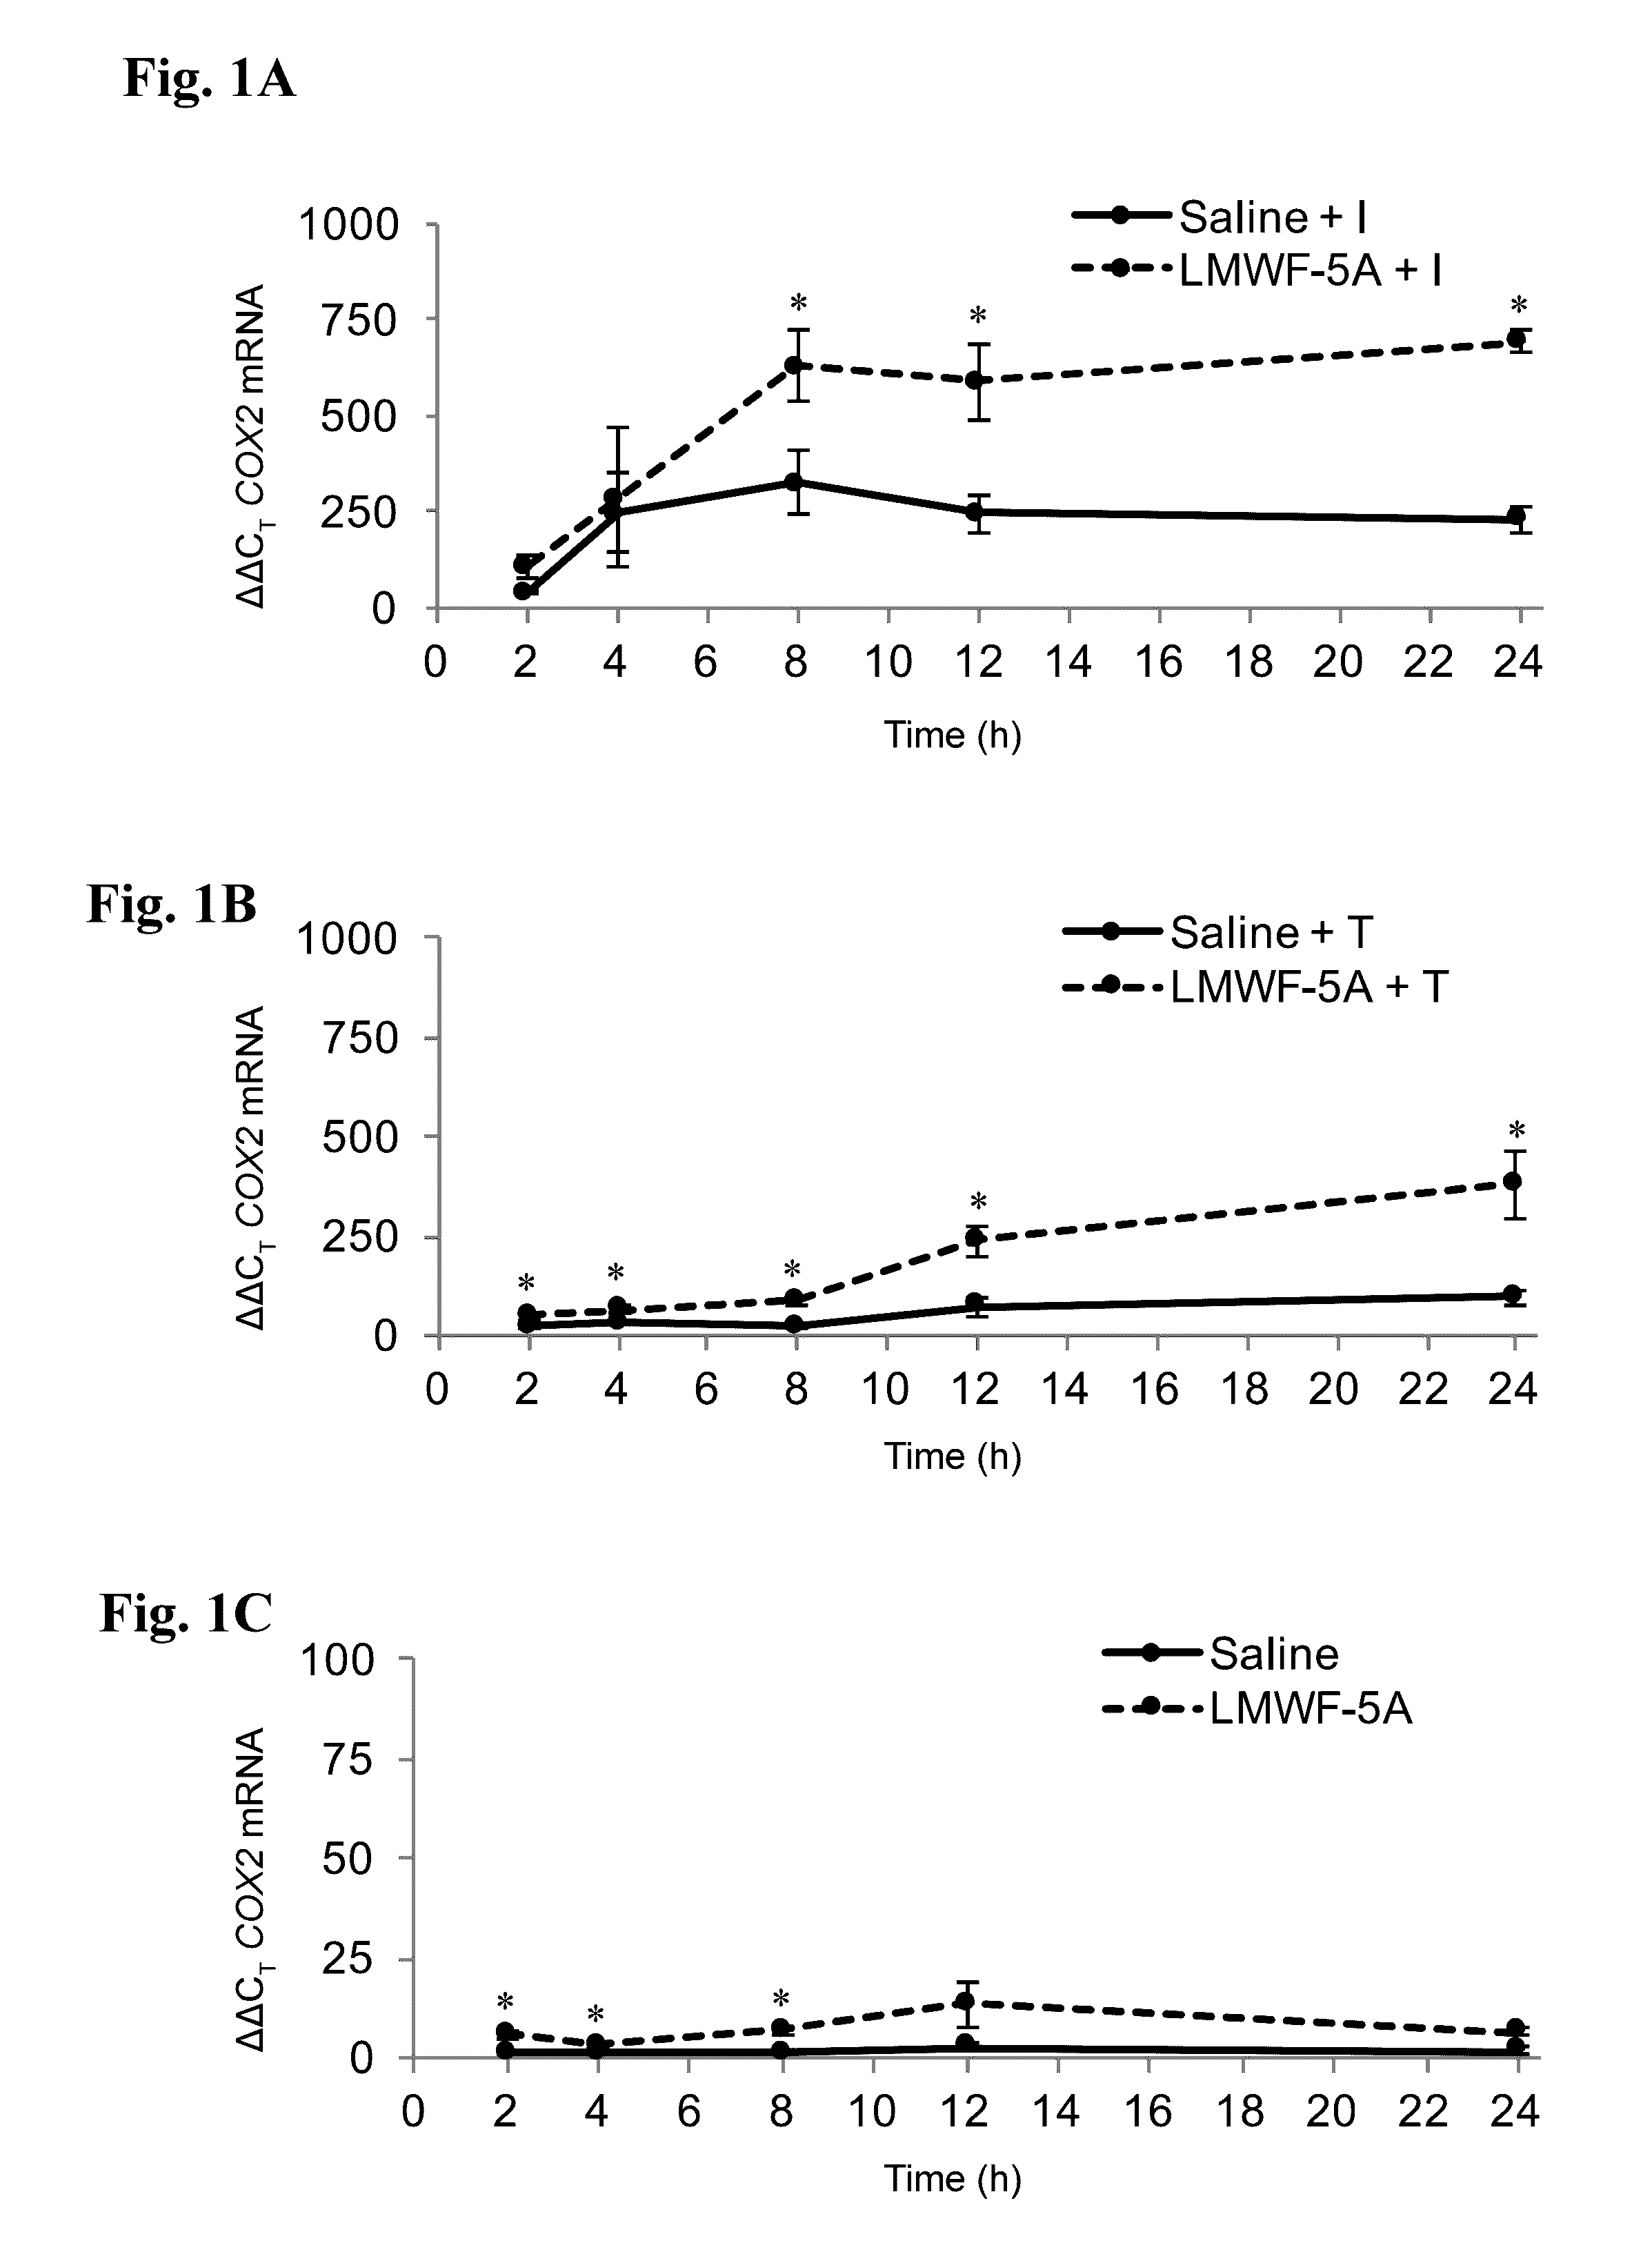 Use of low molecular weight fractions of human serum albumin in treating diseases